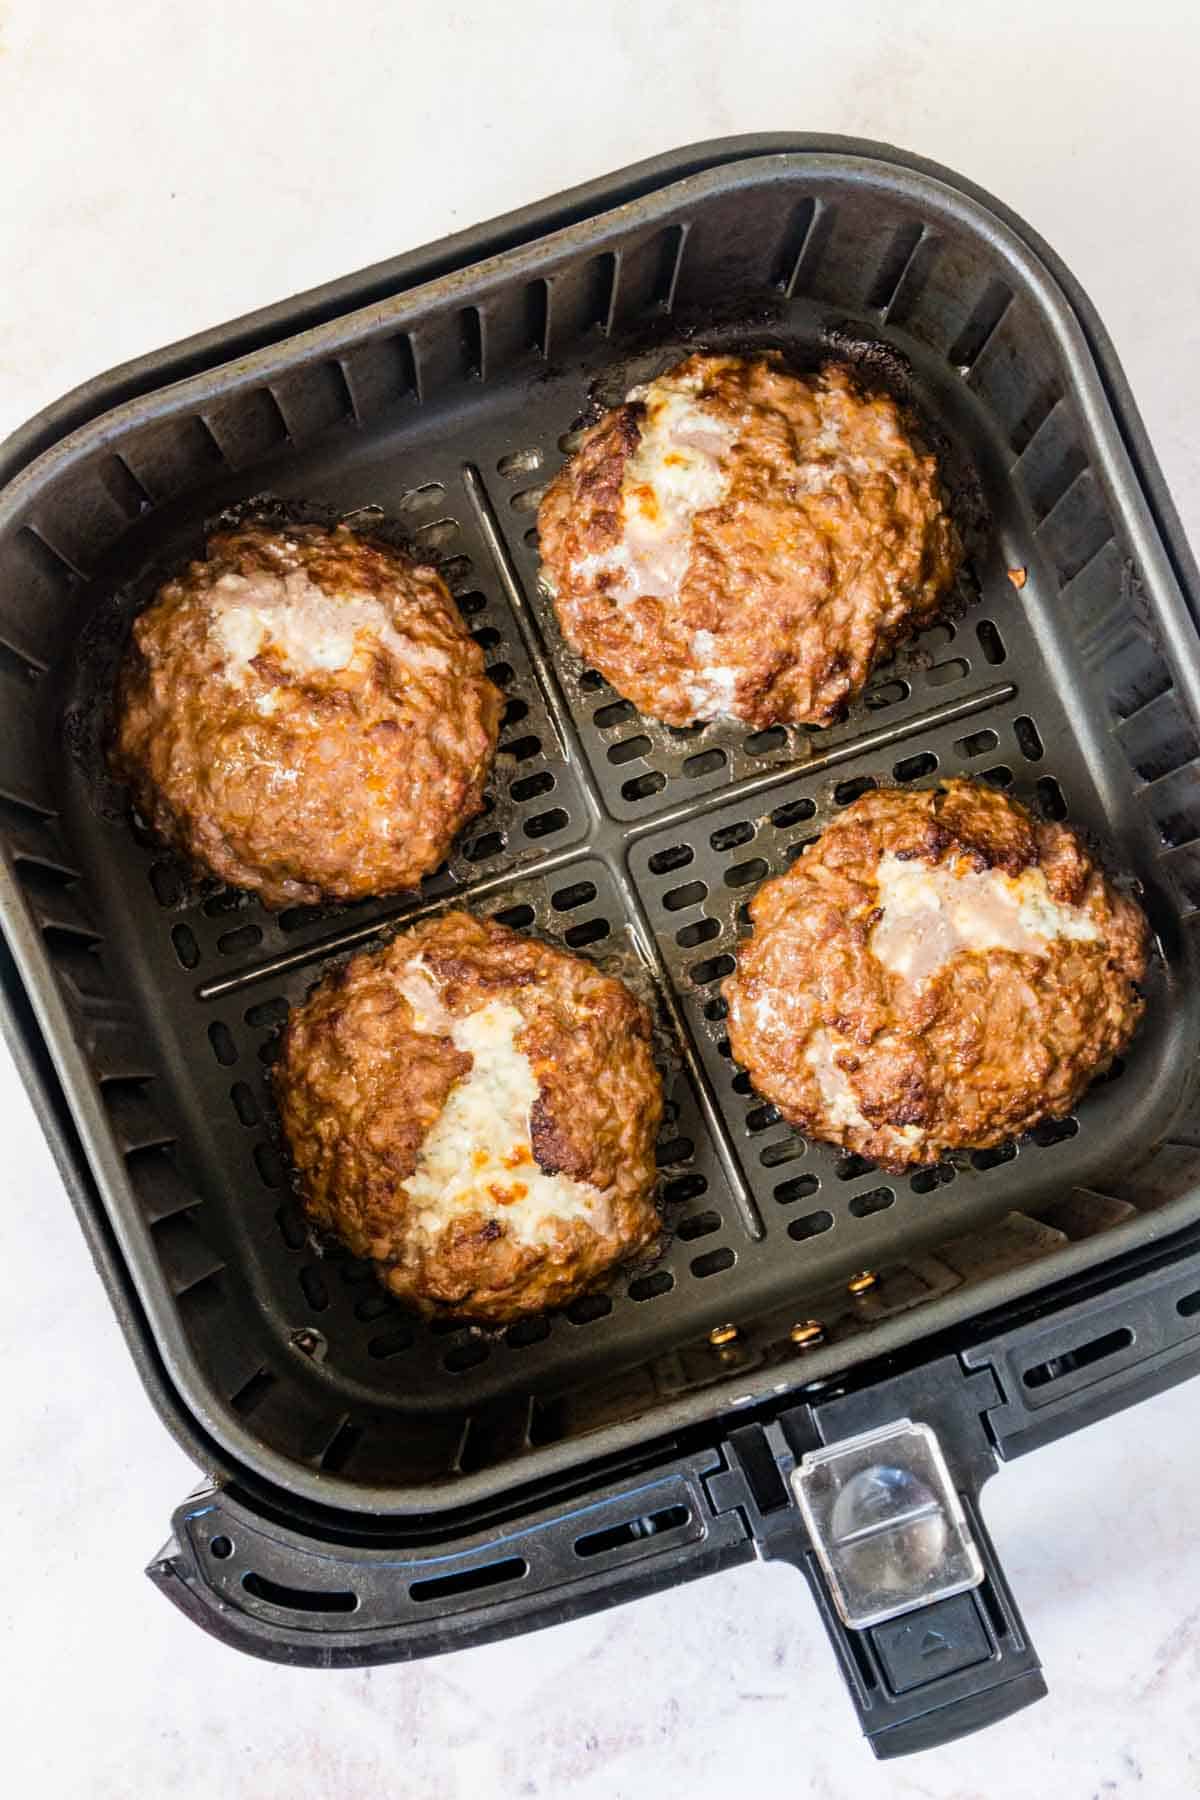 Cooked stuffed blue cheese burgers in an air fryer basket.